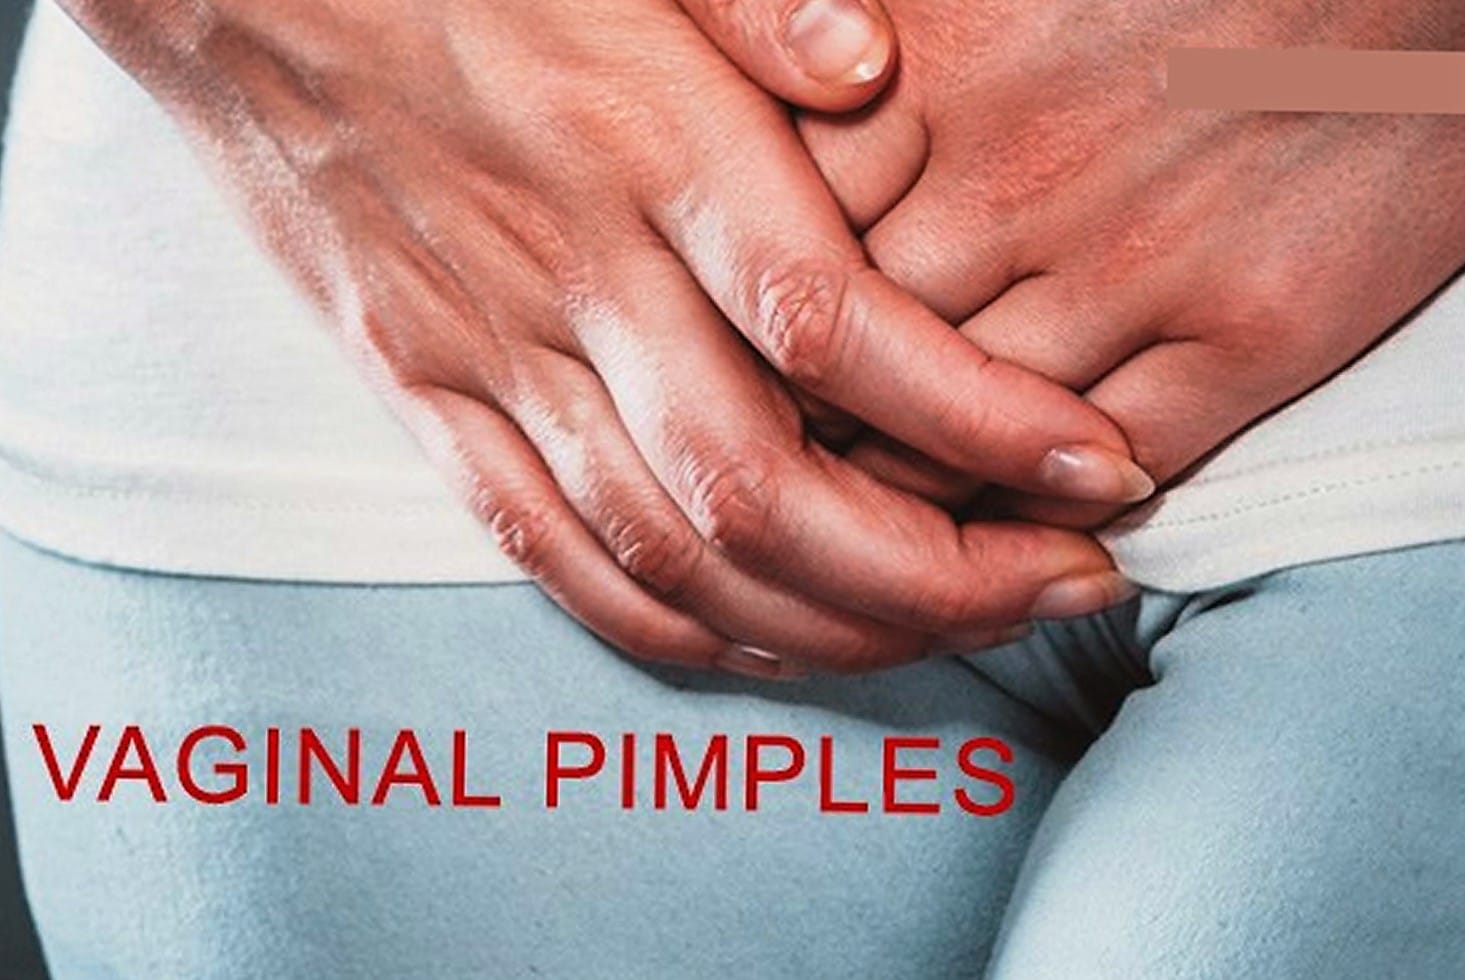 pimples on private parts female home remedies